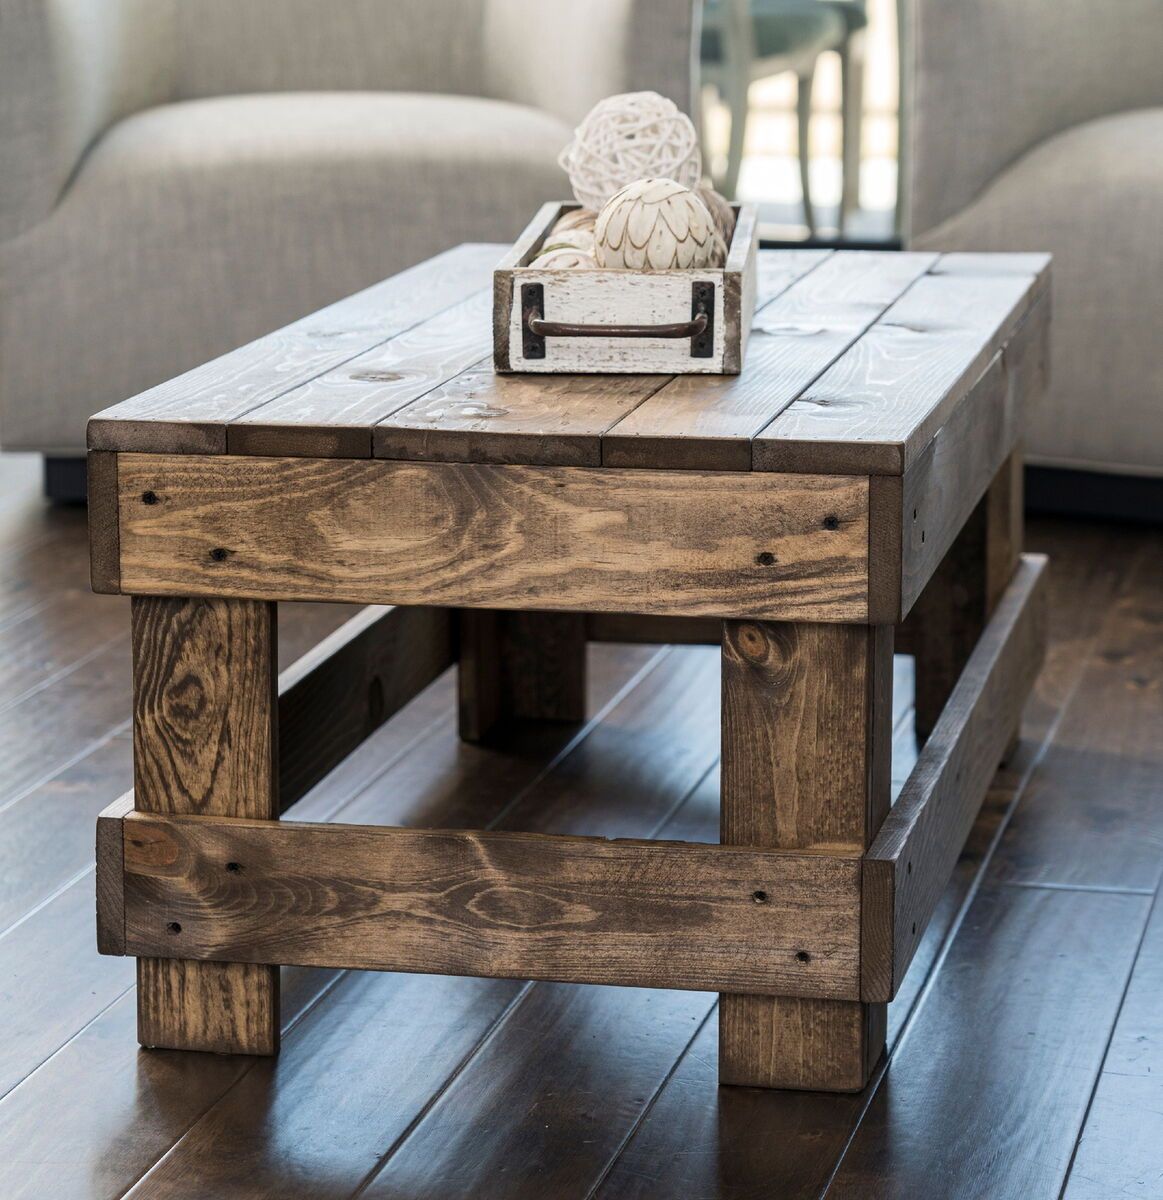 Woven Paths Landmark Pine Solid Wood Farmhouse Coffee Table, Dark Walnut |  Ebay With Woven Paths Coffee Tables (View 7 of 15)